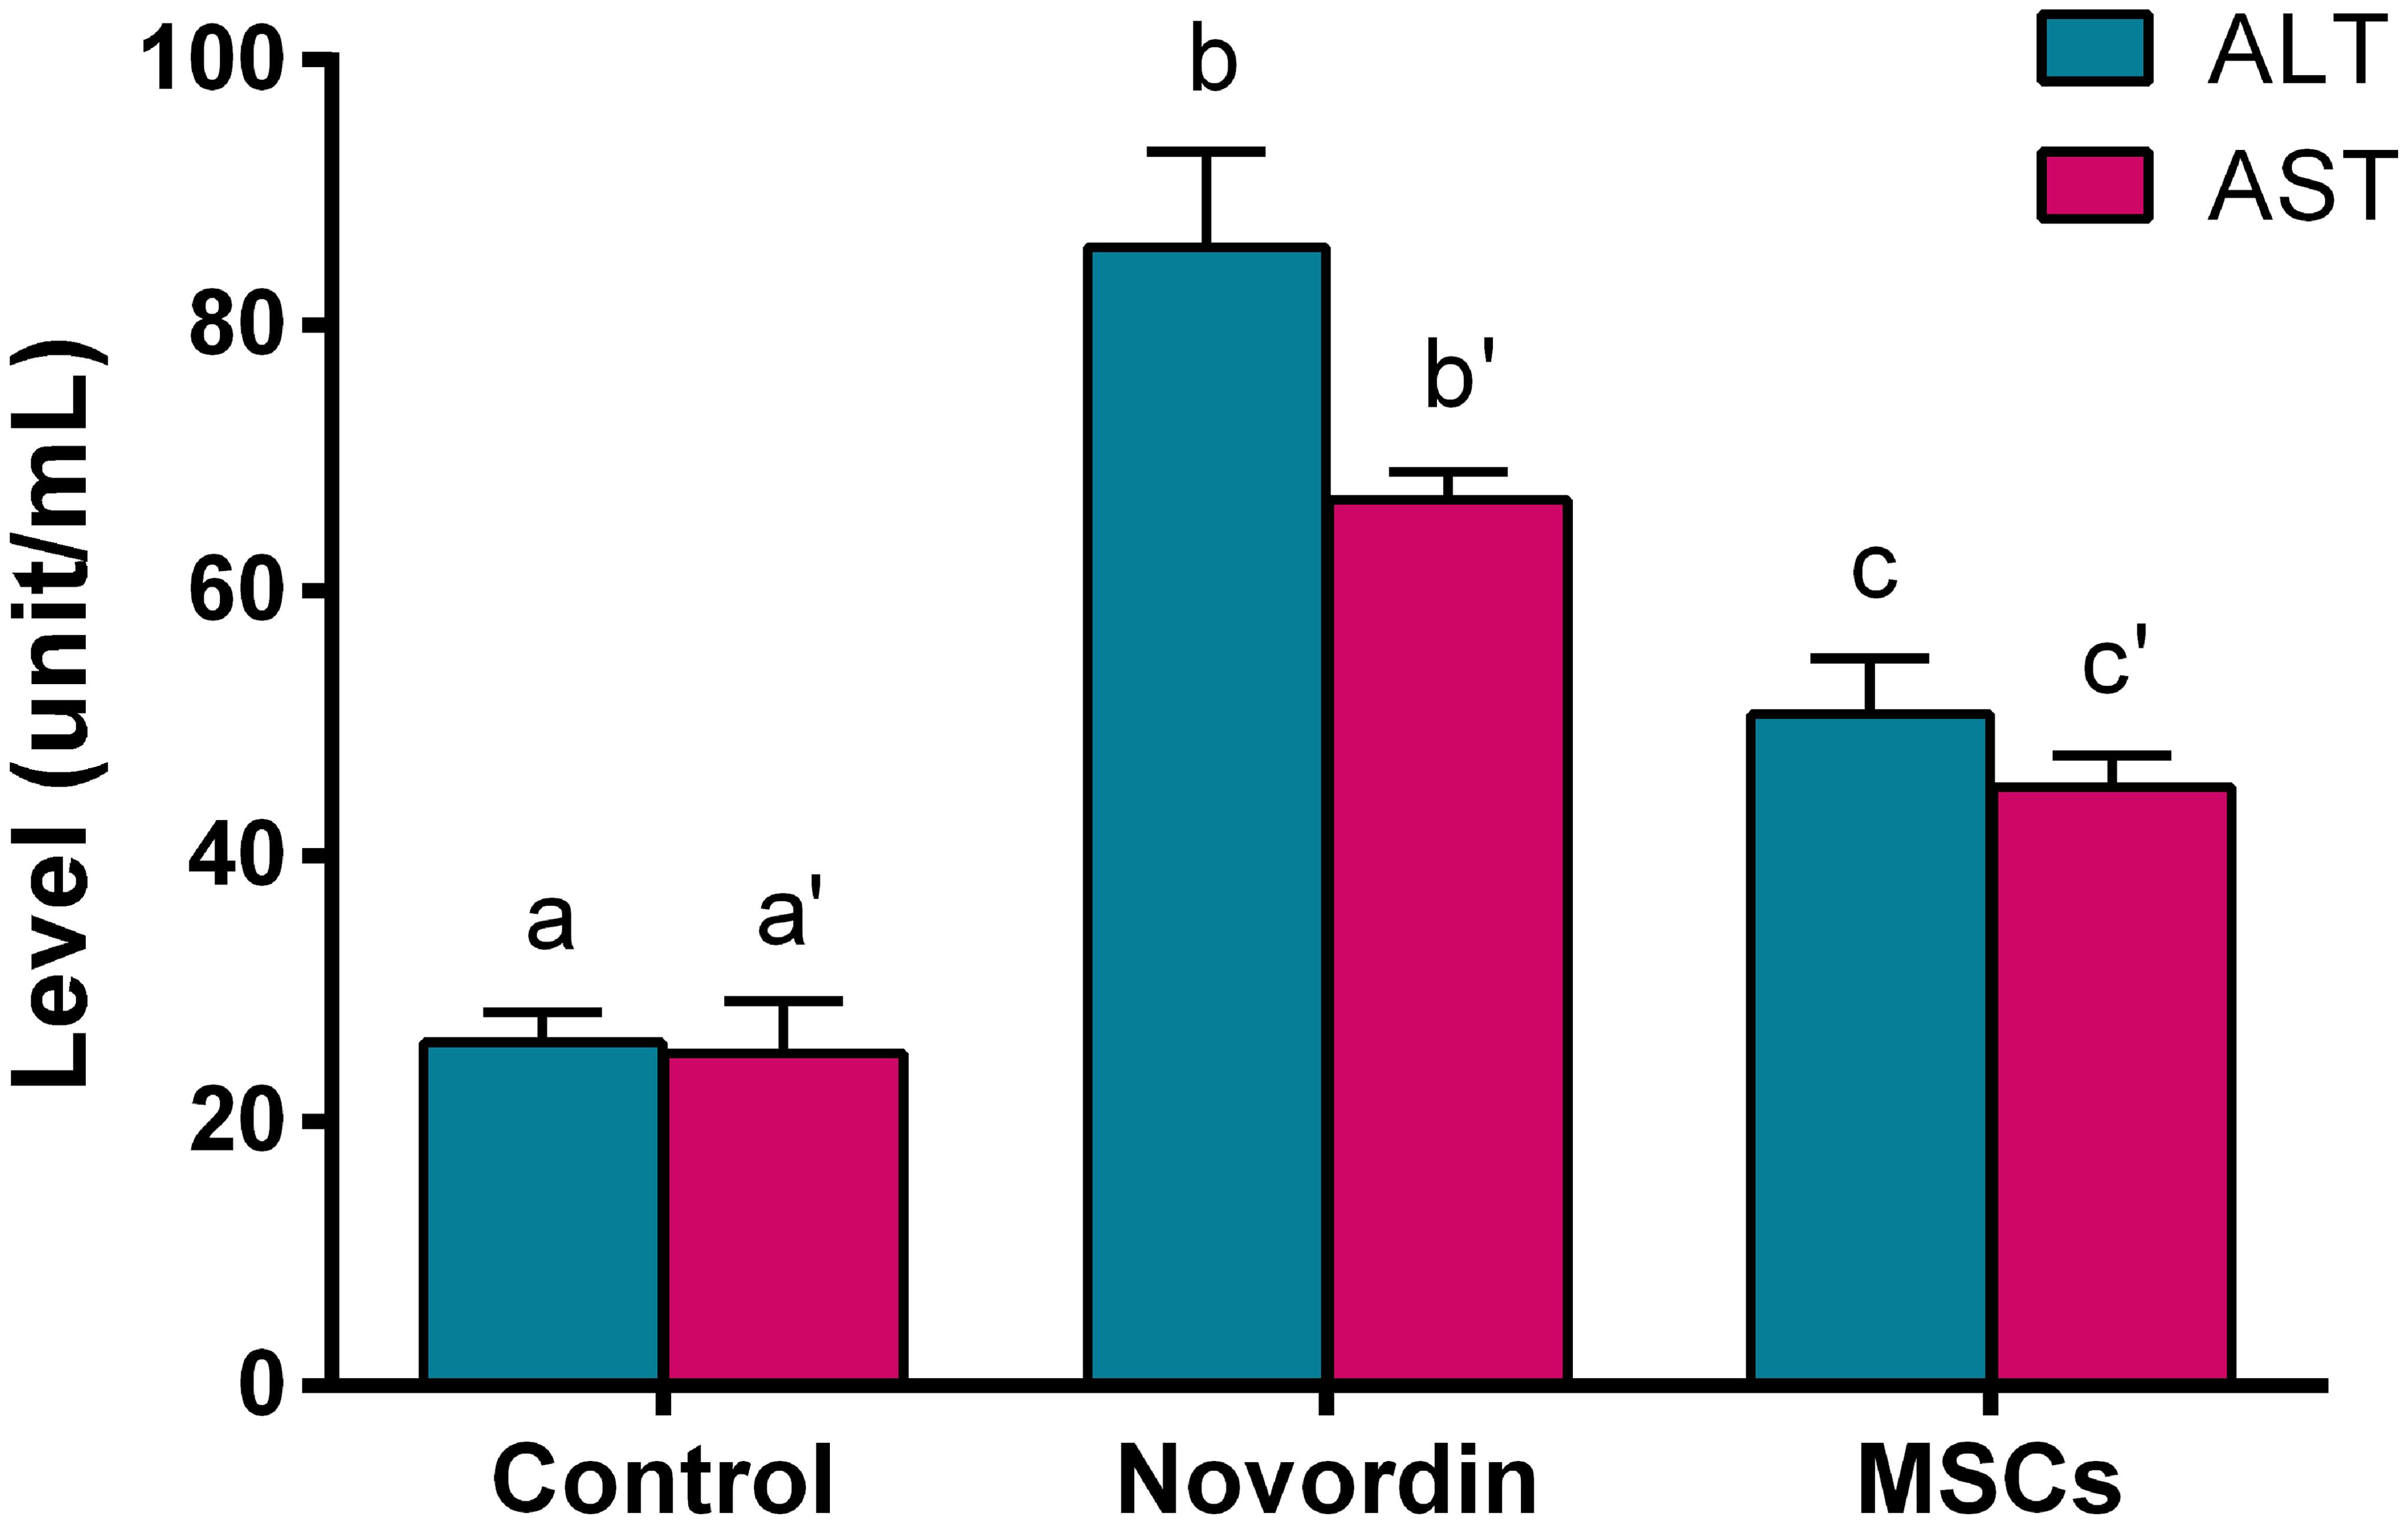 Impact of MSCs on ALT and AST at post-novordin intoxication.